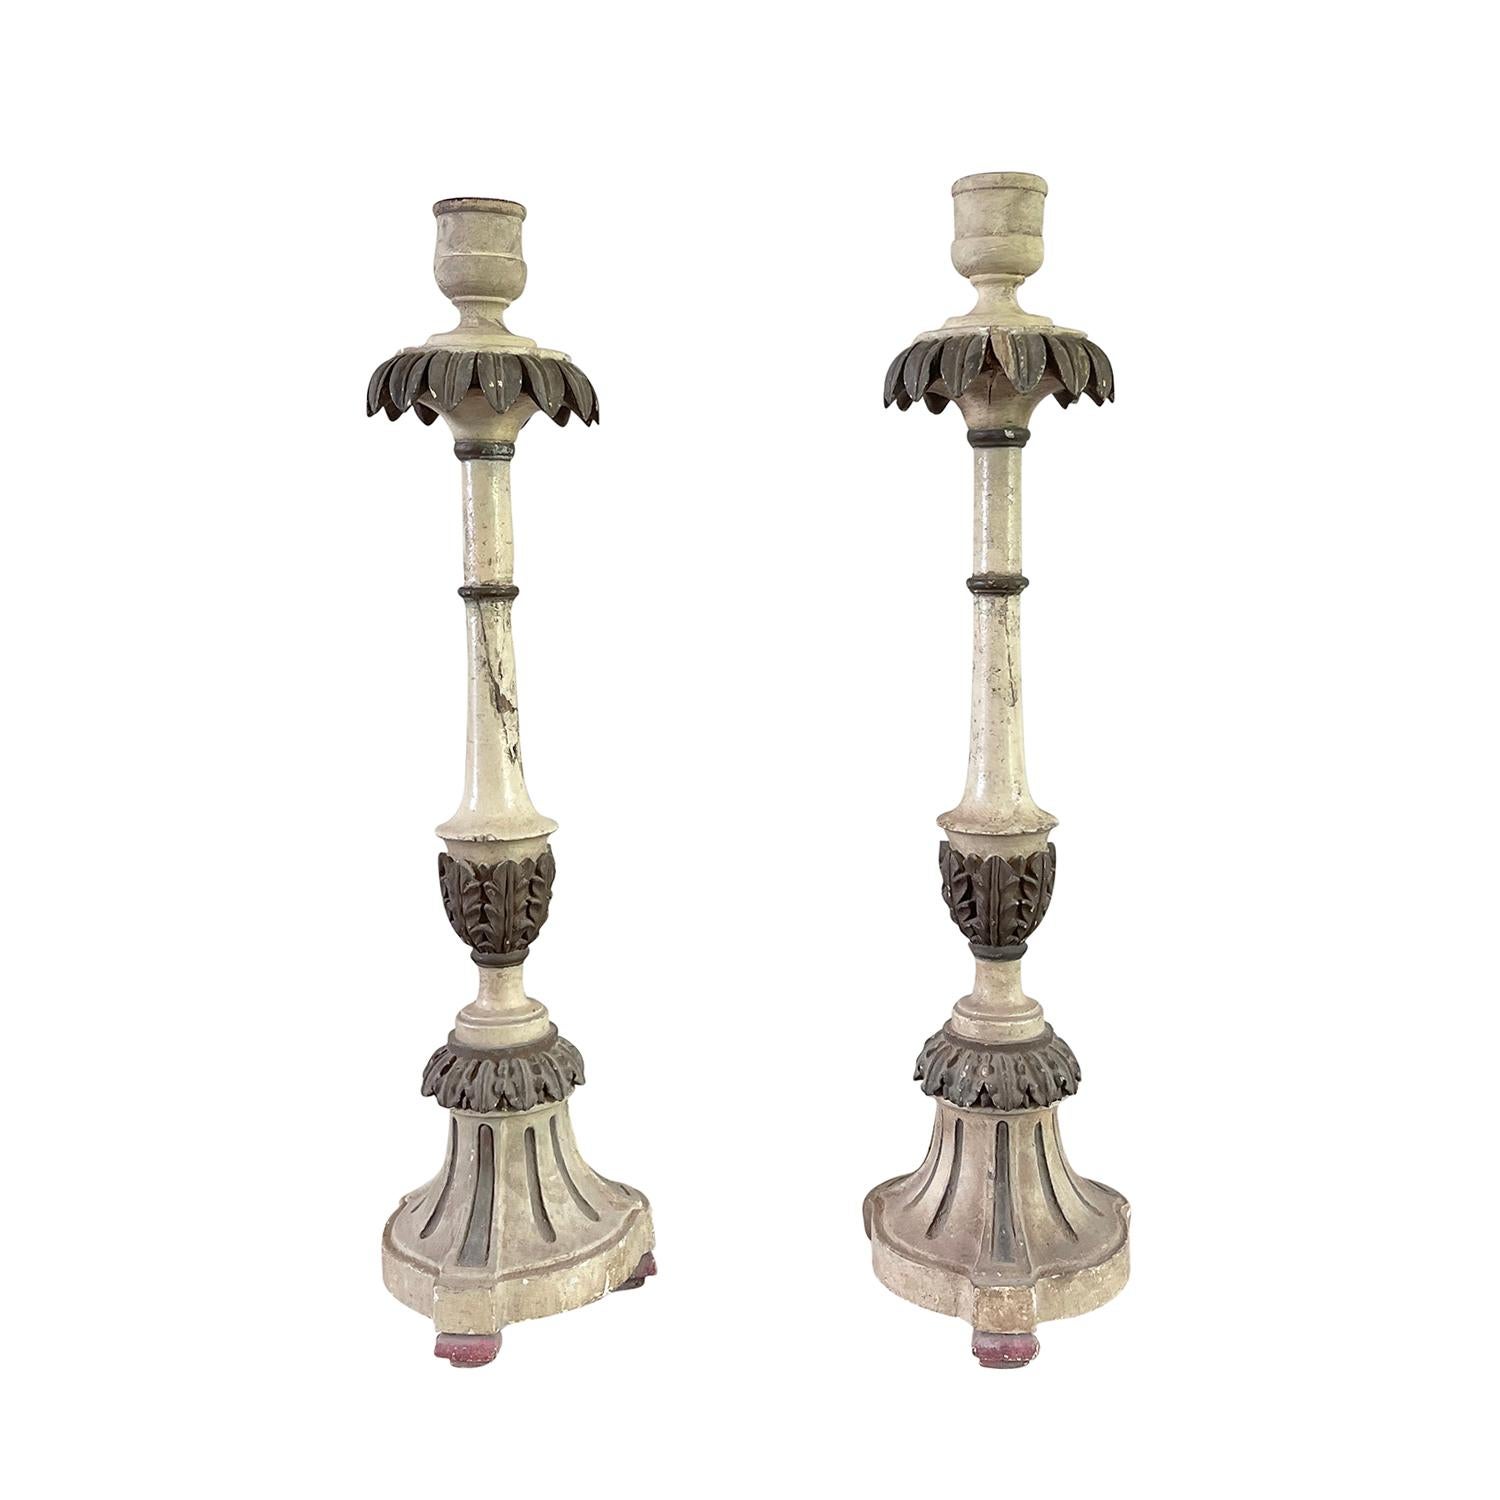 An antique set of two Gustavian candle holders with palm décor foliage ornaments, in good condition. The hand carved Pinewood candle stick is patinated in ecru and grey and is accentuated by hand crafted metal cups in a silvery patina. Elevated by